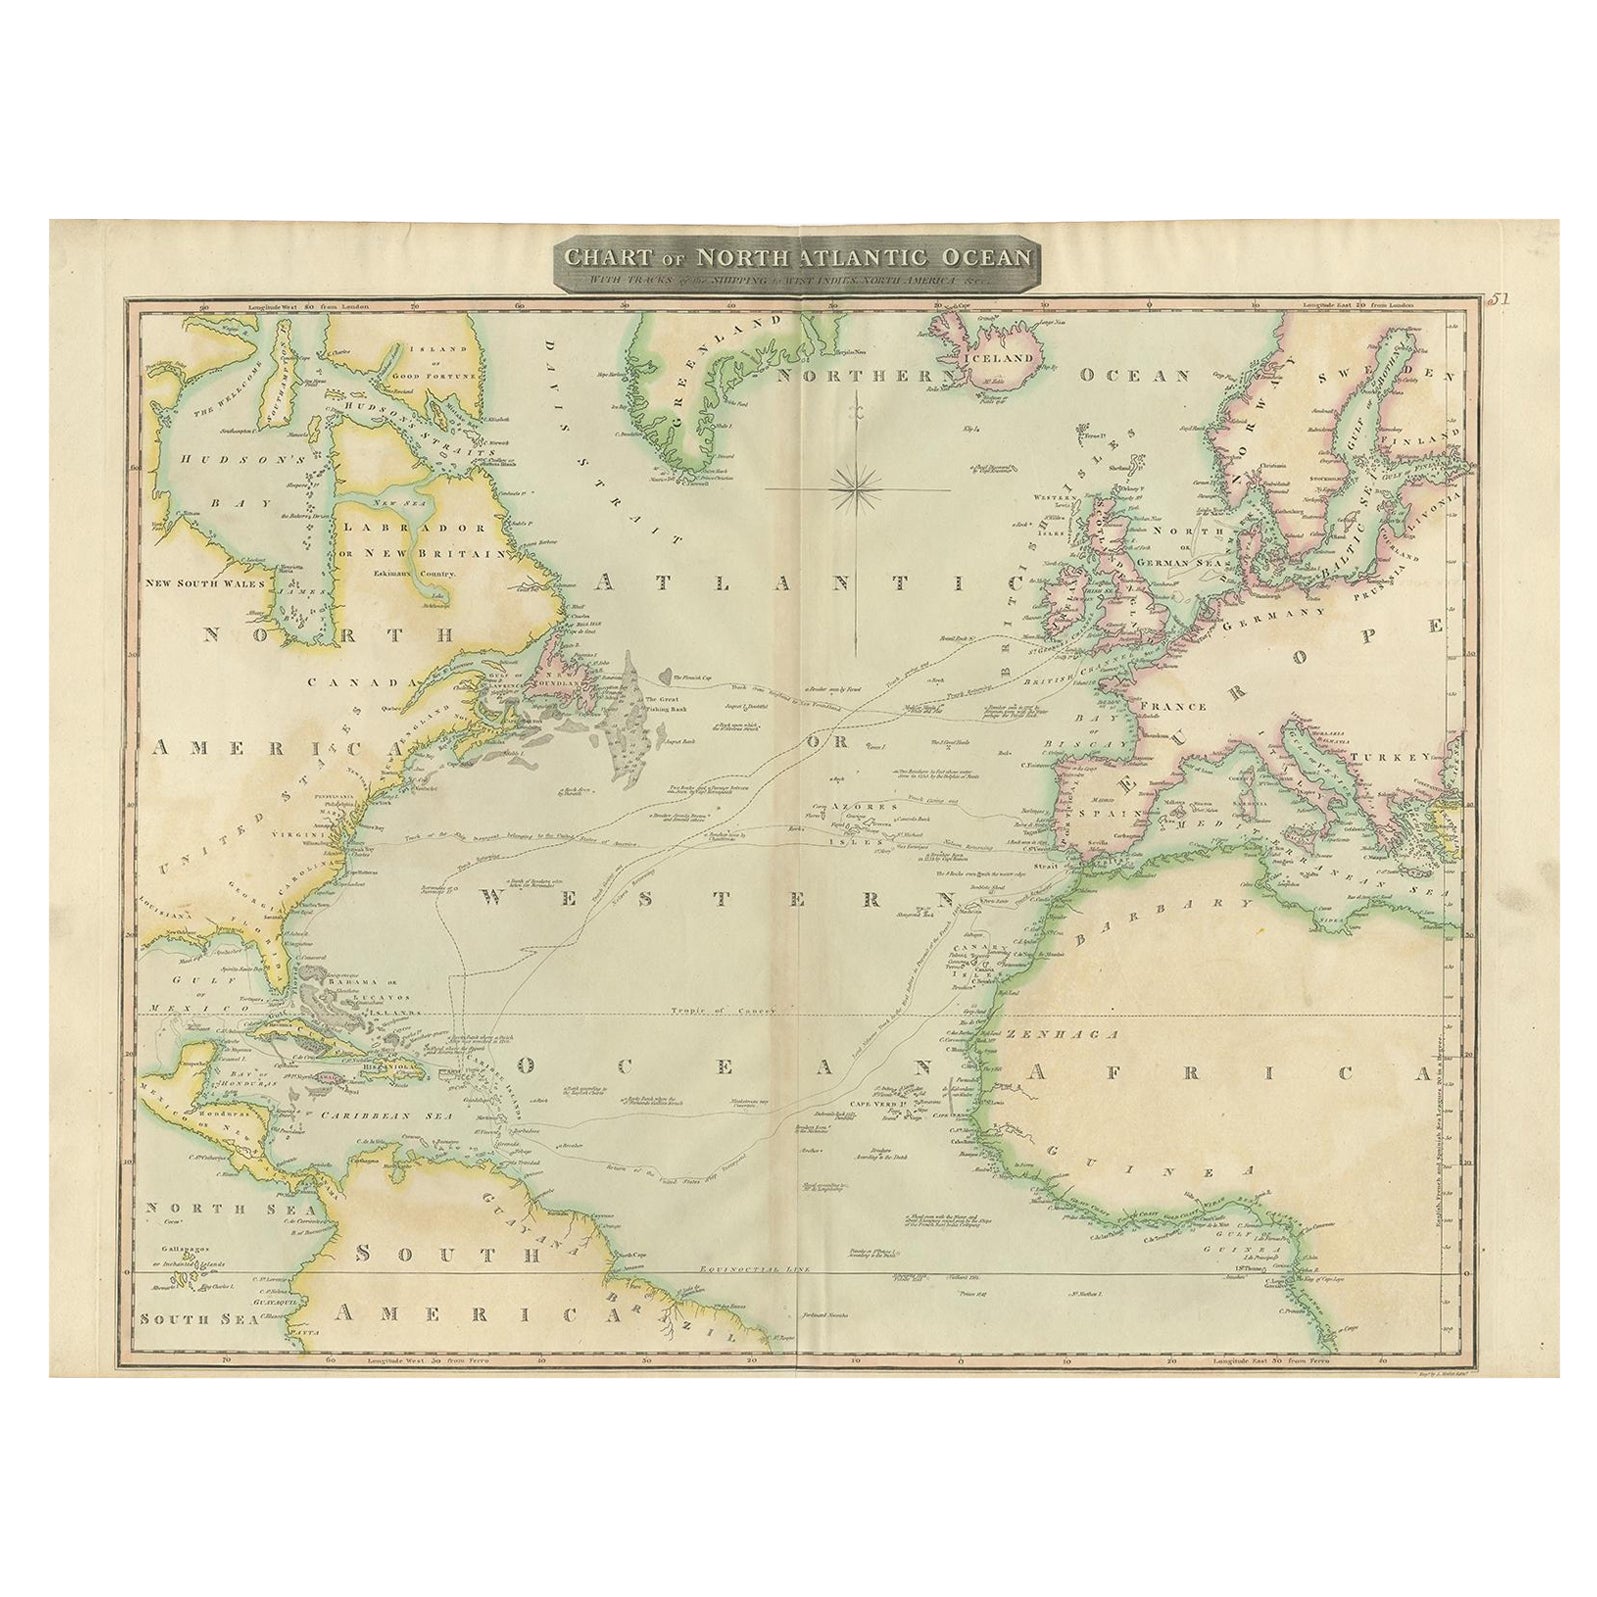 Interesting Map of the Atlantic Showing Nelson's and Trade Routes, 1817